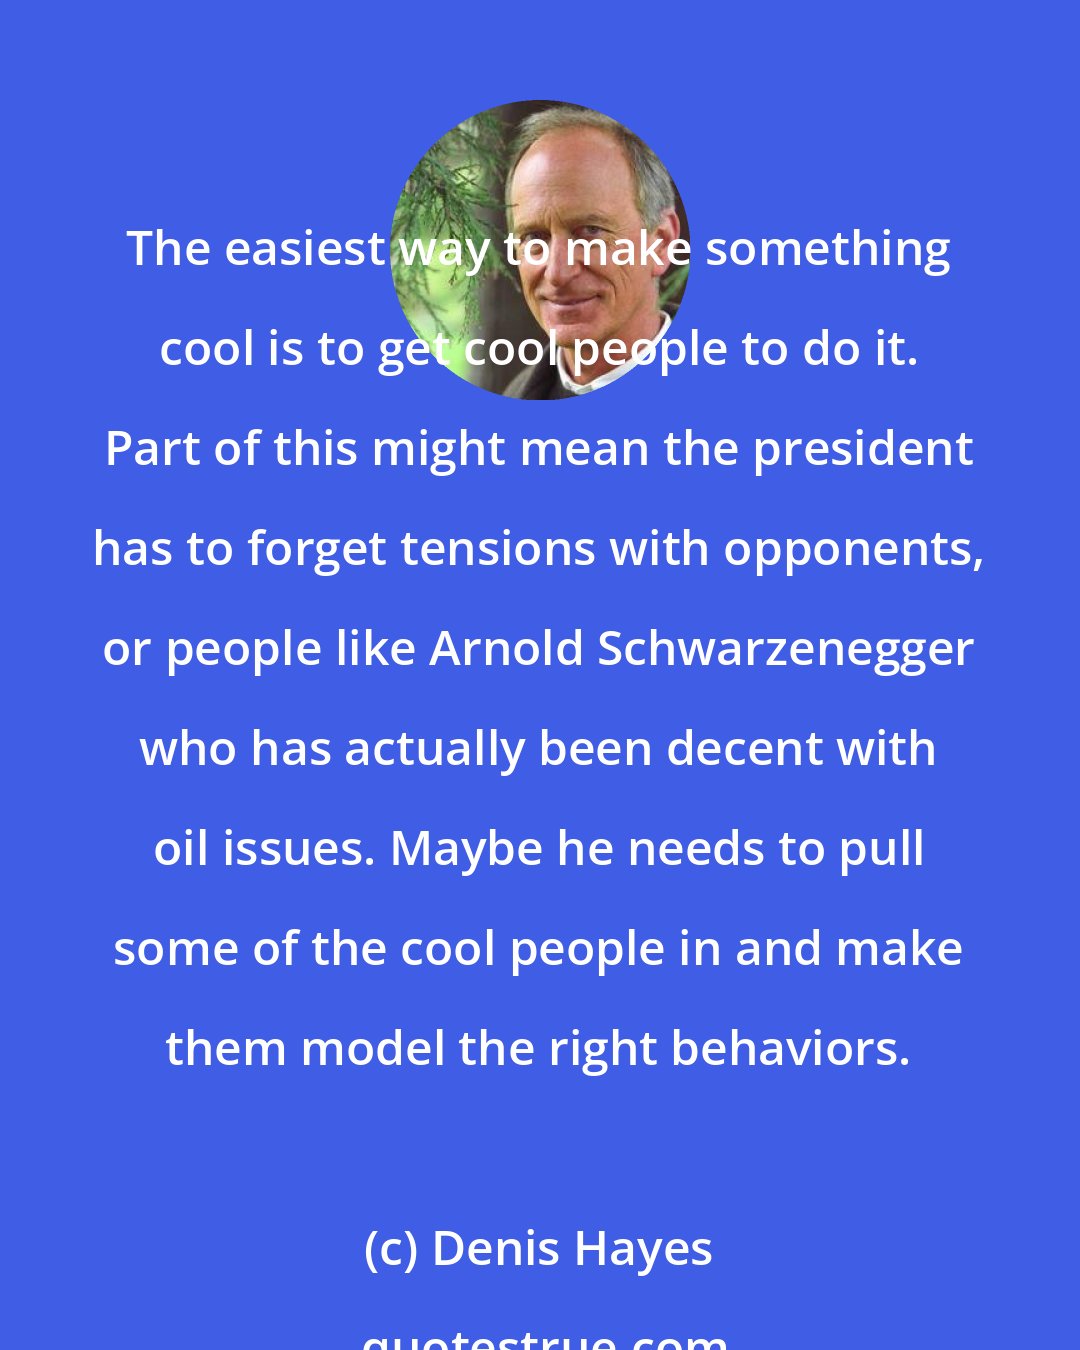 Denis Hayes: The easiest way to make something cool is to get cool people to do it. Part of this might mean the president has to forget tensions with opponents, or people like Arnold Schwarzenegger who has actually been decent with oil issues. Maybe he needs to pull some of the cool people in and make them model the right behaviors.